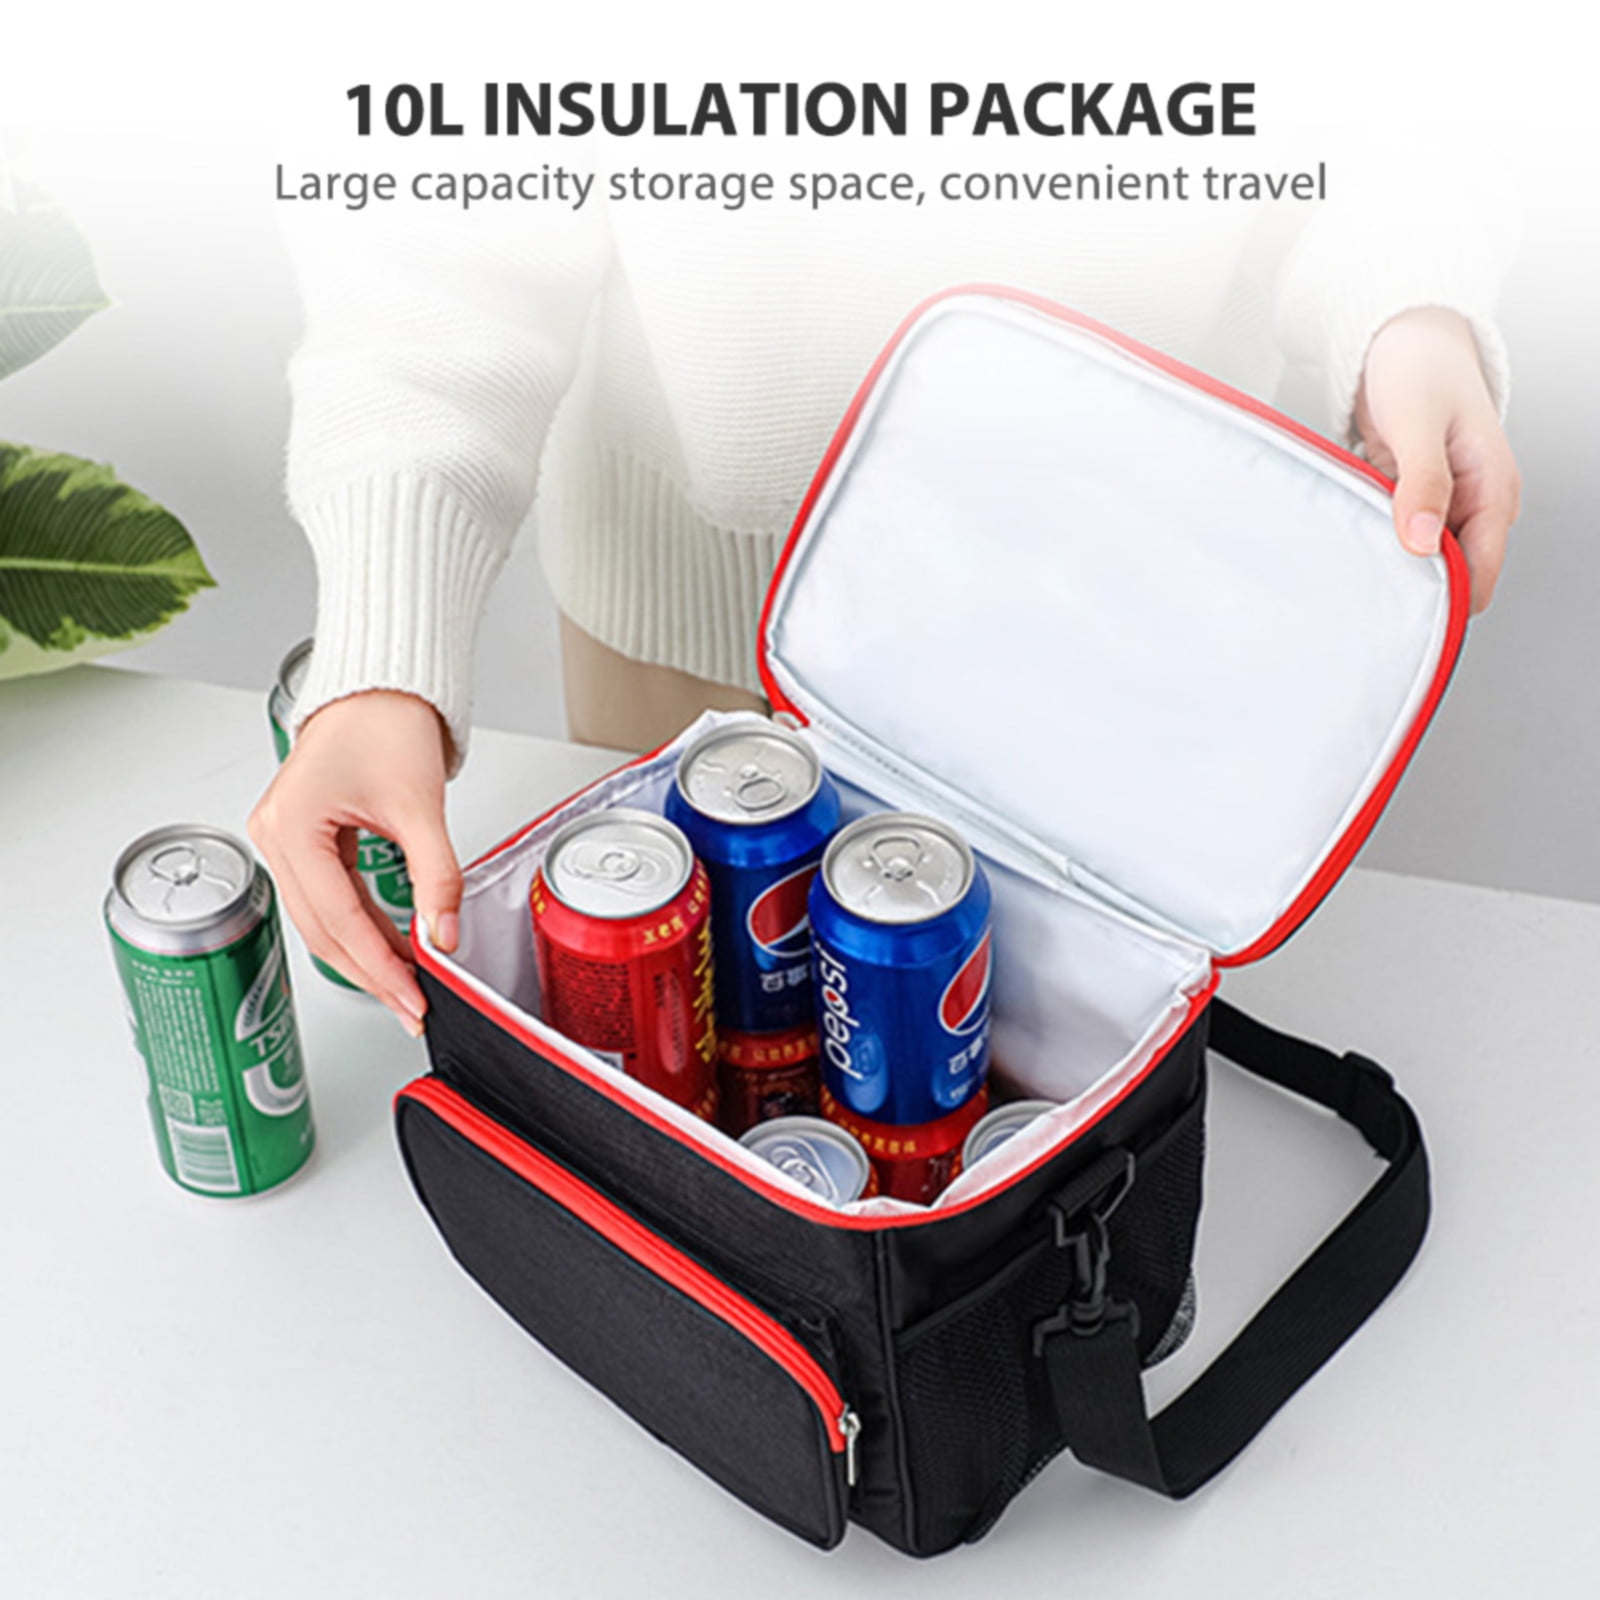  Top&Top Insulated Lunch Box Set and Cooler Bag for Men, Women  (Tote Lunch Bag Includes 3 Reusable Meal Prep Containers + 2 Ice Pack +  Detachable Shoulder Strap) Lunch Box for